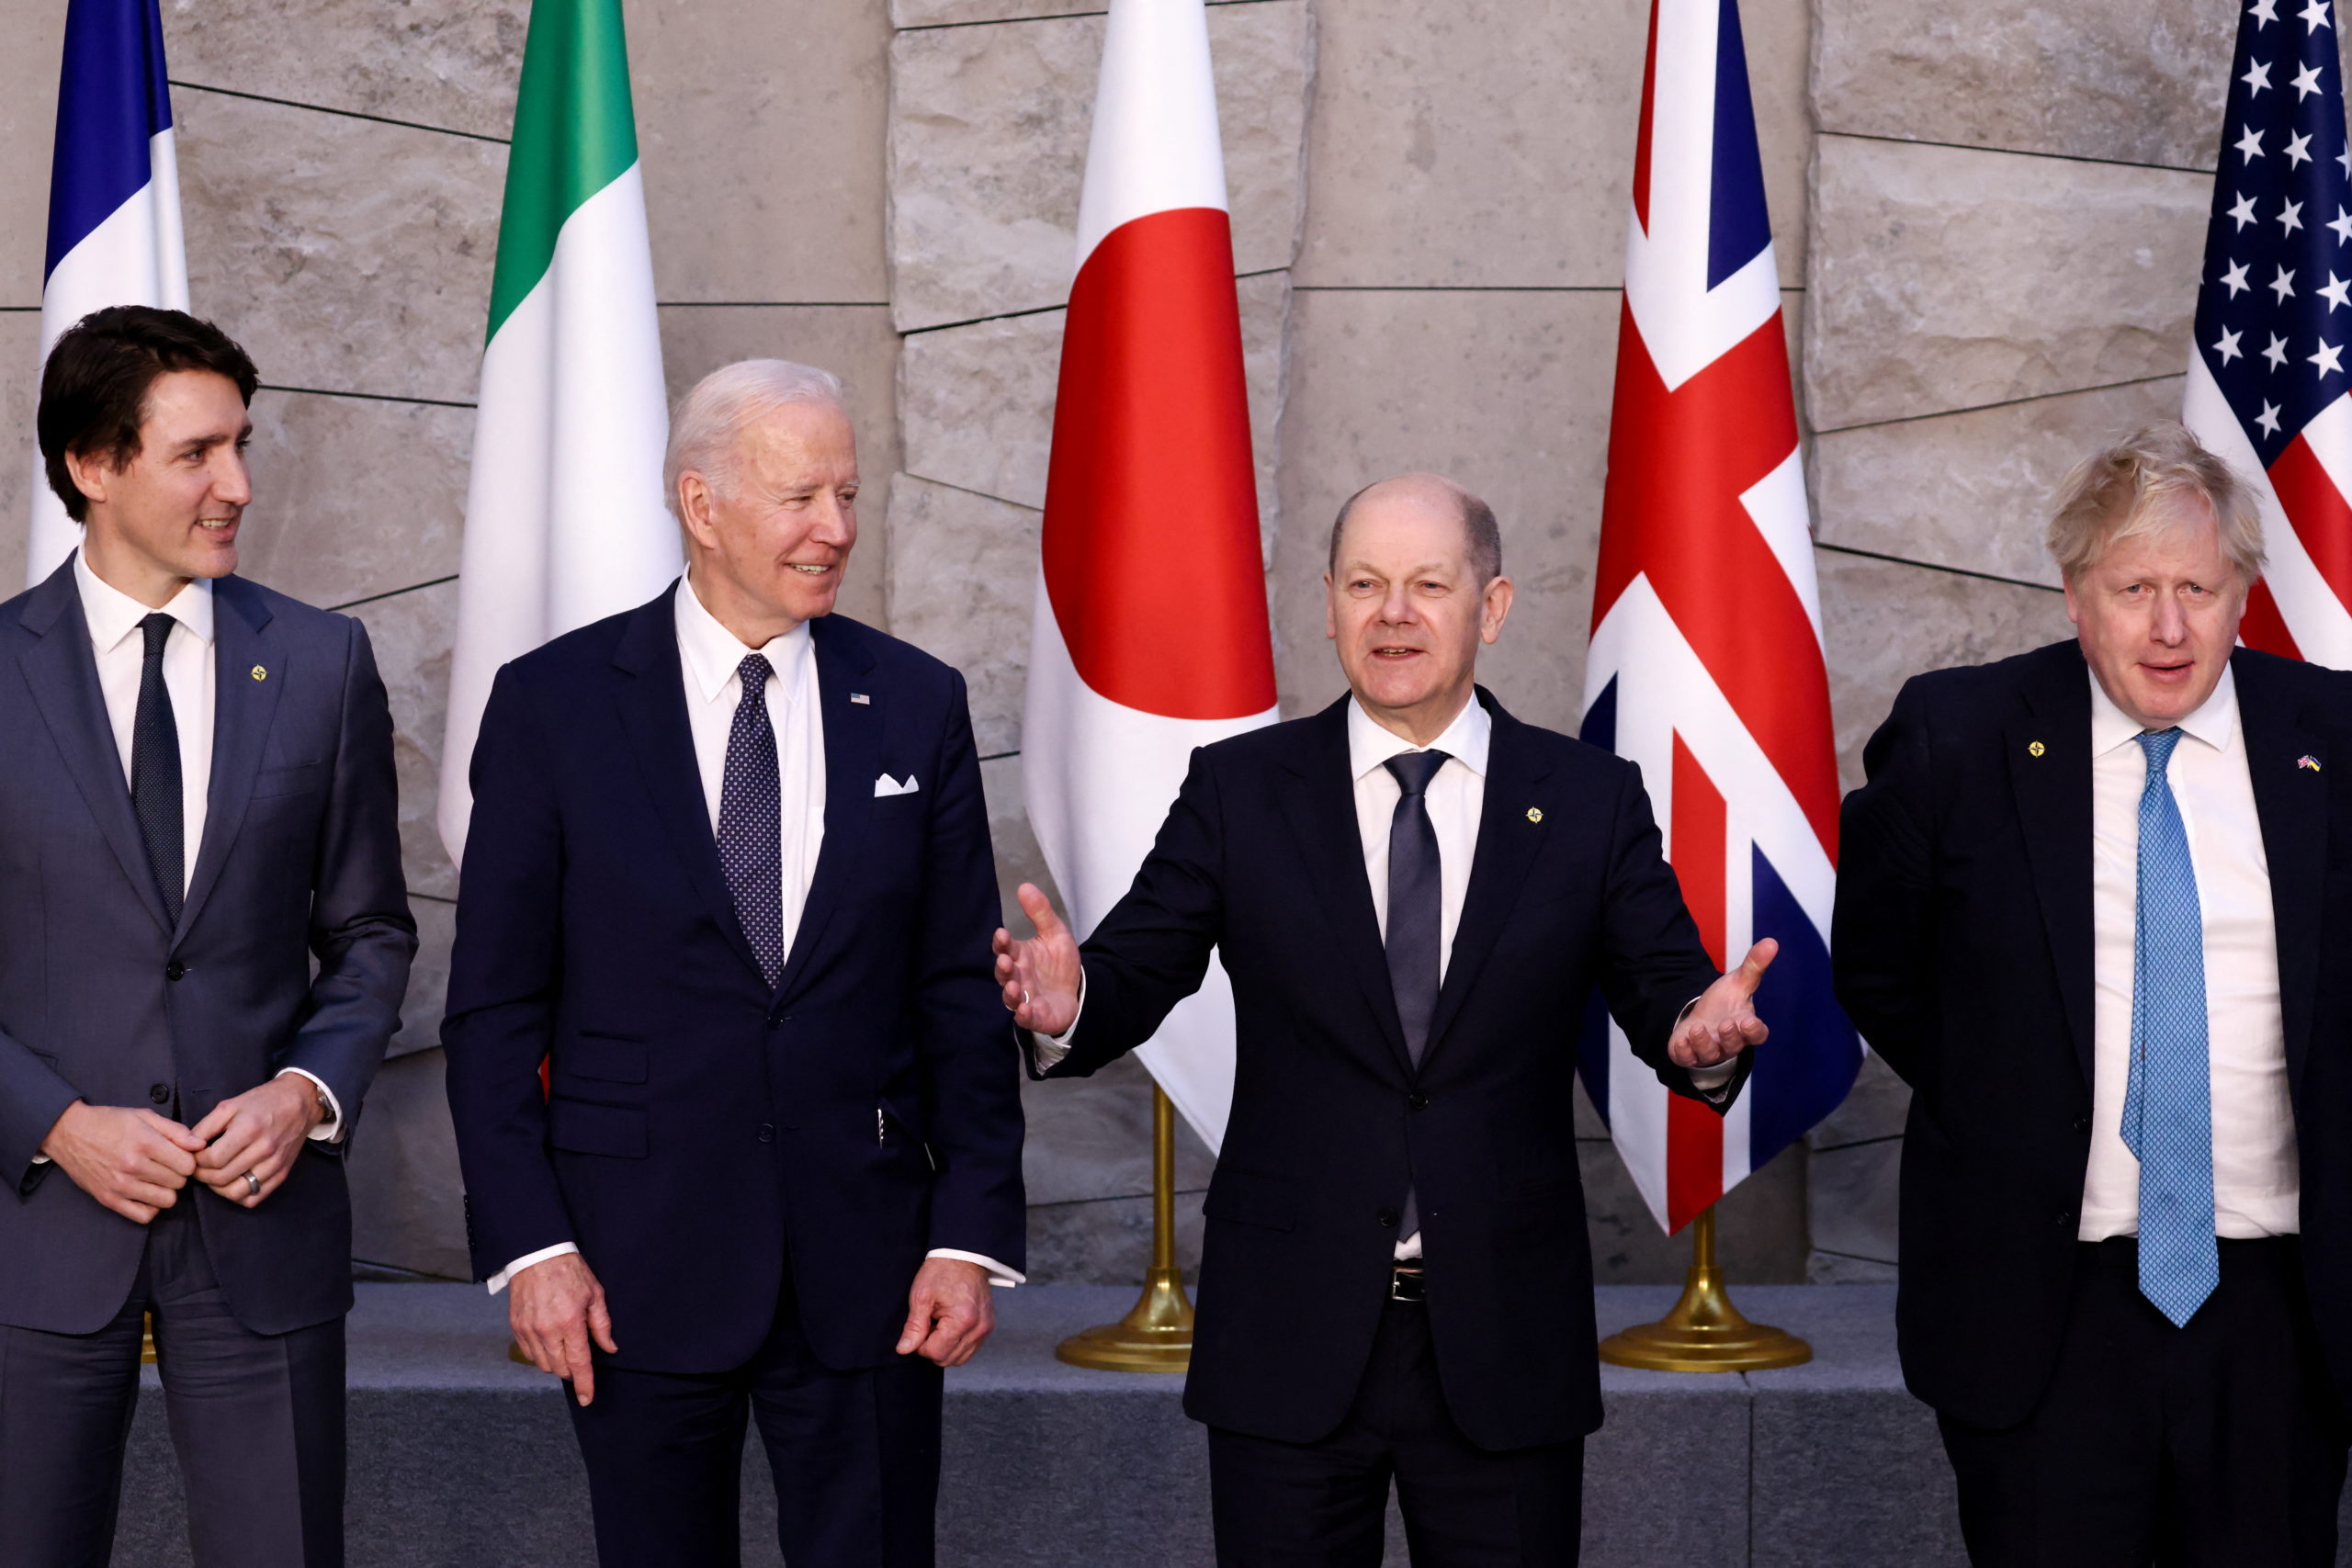 BRUSSELS, BELGIUM - MARCH 24: Canada's Prime Minister Justin Trudeau, U.S. President Joe Biden, Germany's Chancellor Olaf Scholz, and British Prime Minister Boris Johnson pose for a G7 leaders' family photo during a NATO summit on Russia's invasion of Ukraine, at the alliance's headquarters in Brussels, on March 24, 2022 in Brussels, Belgium. Heads of State and Government take part in the North Atlantic Council (NAC) Summit. They will discuss the consequences of President Putin's invasion of Ukraine and the role of China in the crisis. Then decide on the next steps to strengthen NATO's deterrence and defence. (Photo Henry Nicholls - Pool/Getty Images)